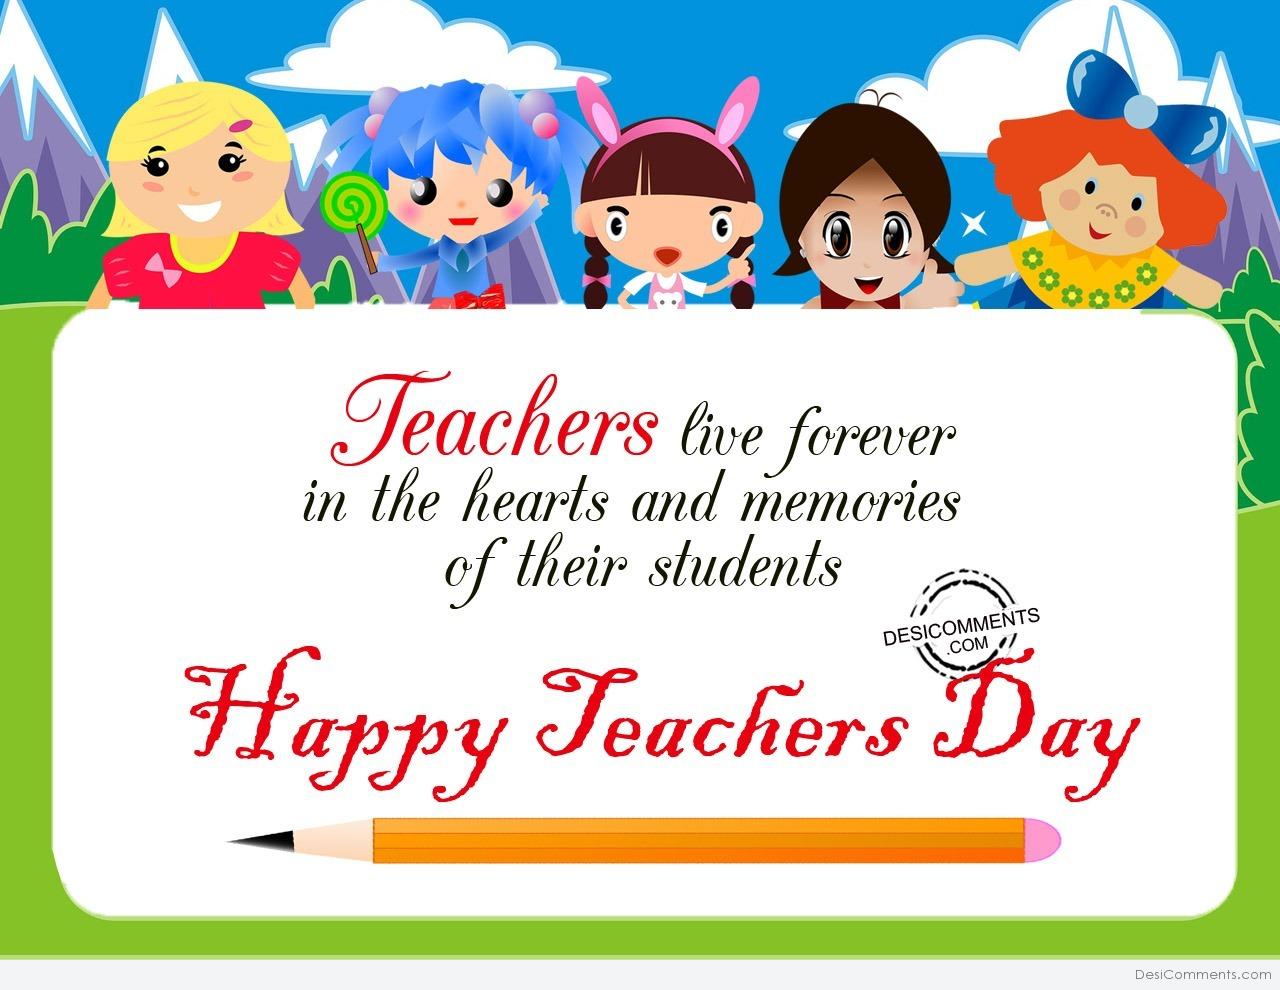 Happy Teachers Day Image Wishes, Quotes Greetings SMS